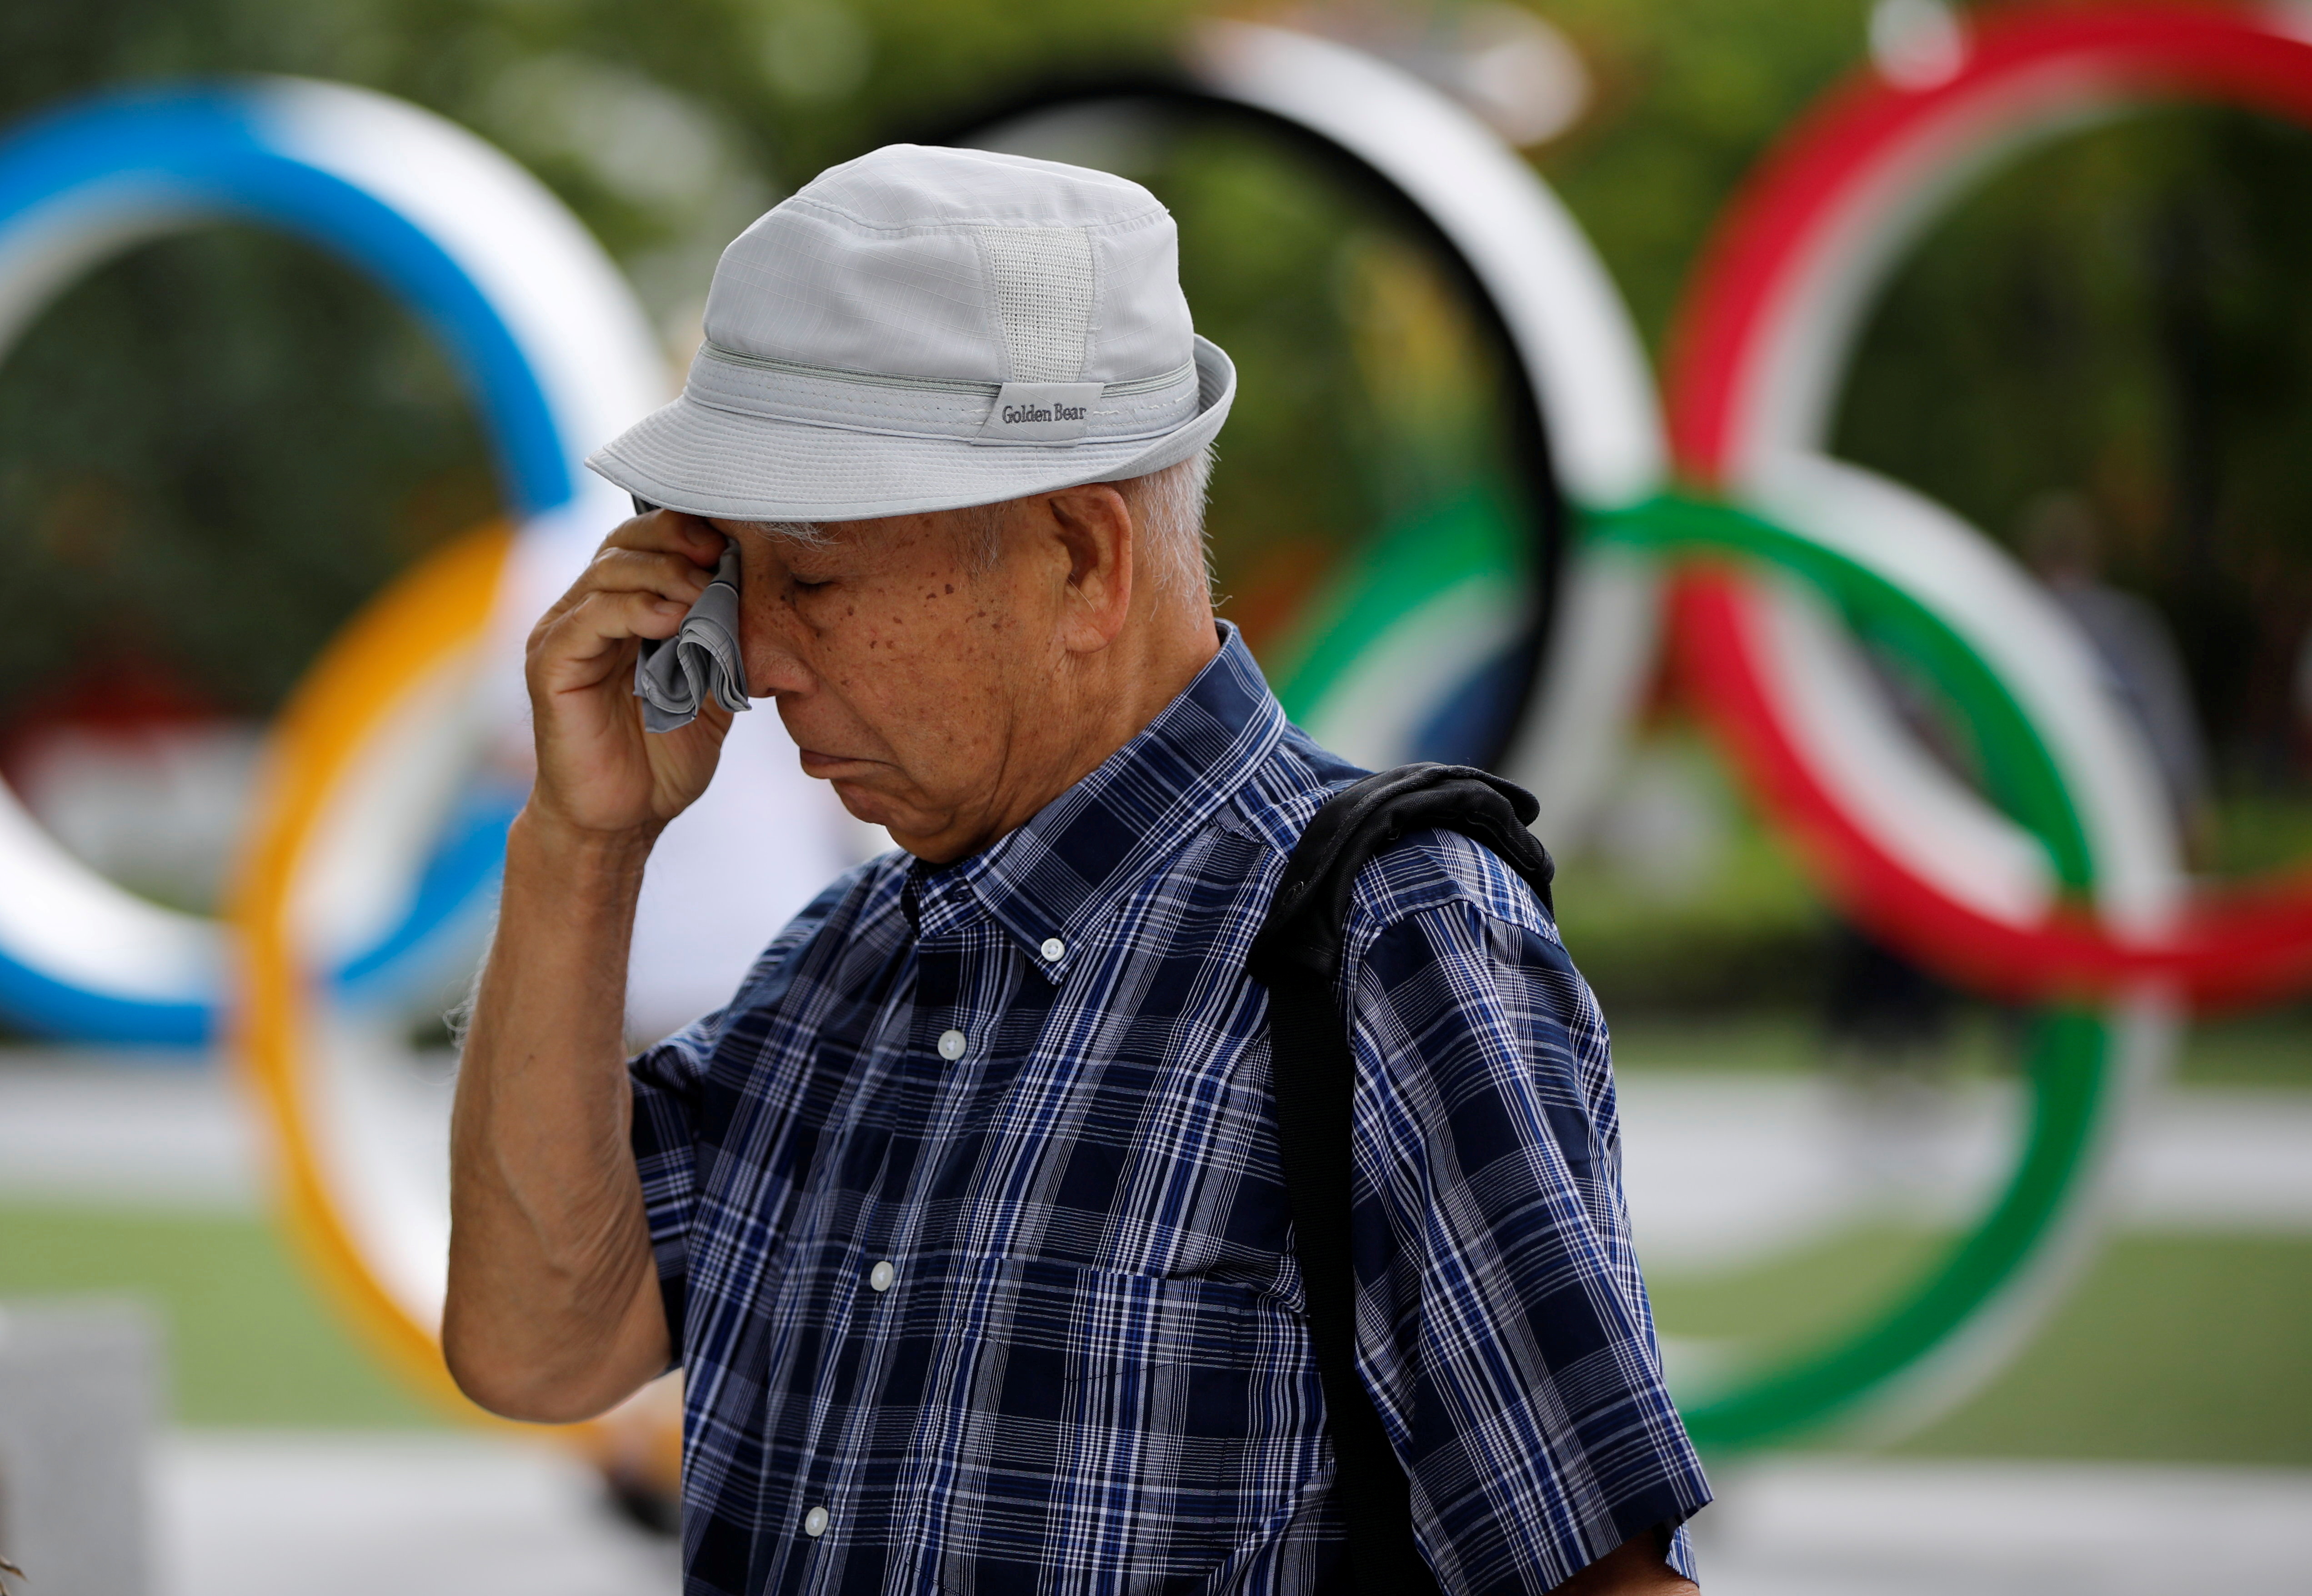 Kohei Jinno wipes his eyes in front of the Olympic Rings monument near the Natioonal Stadium in Tokyo